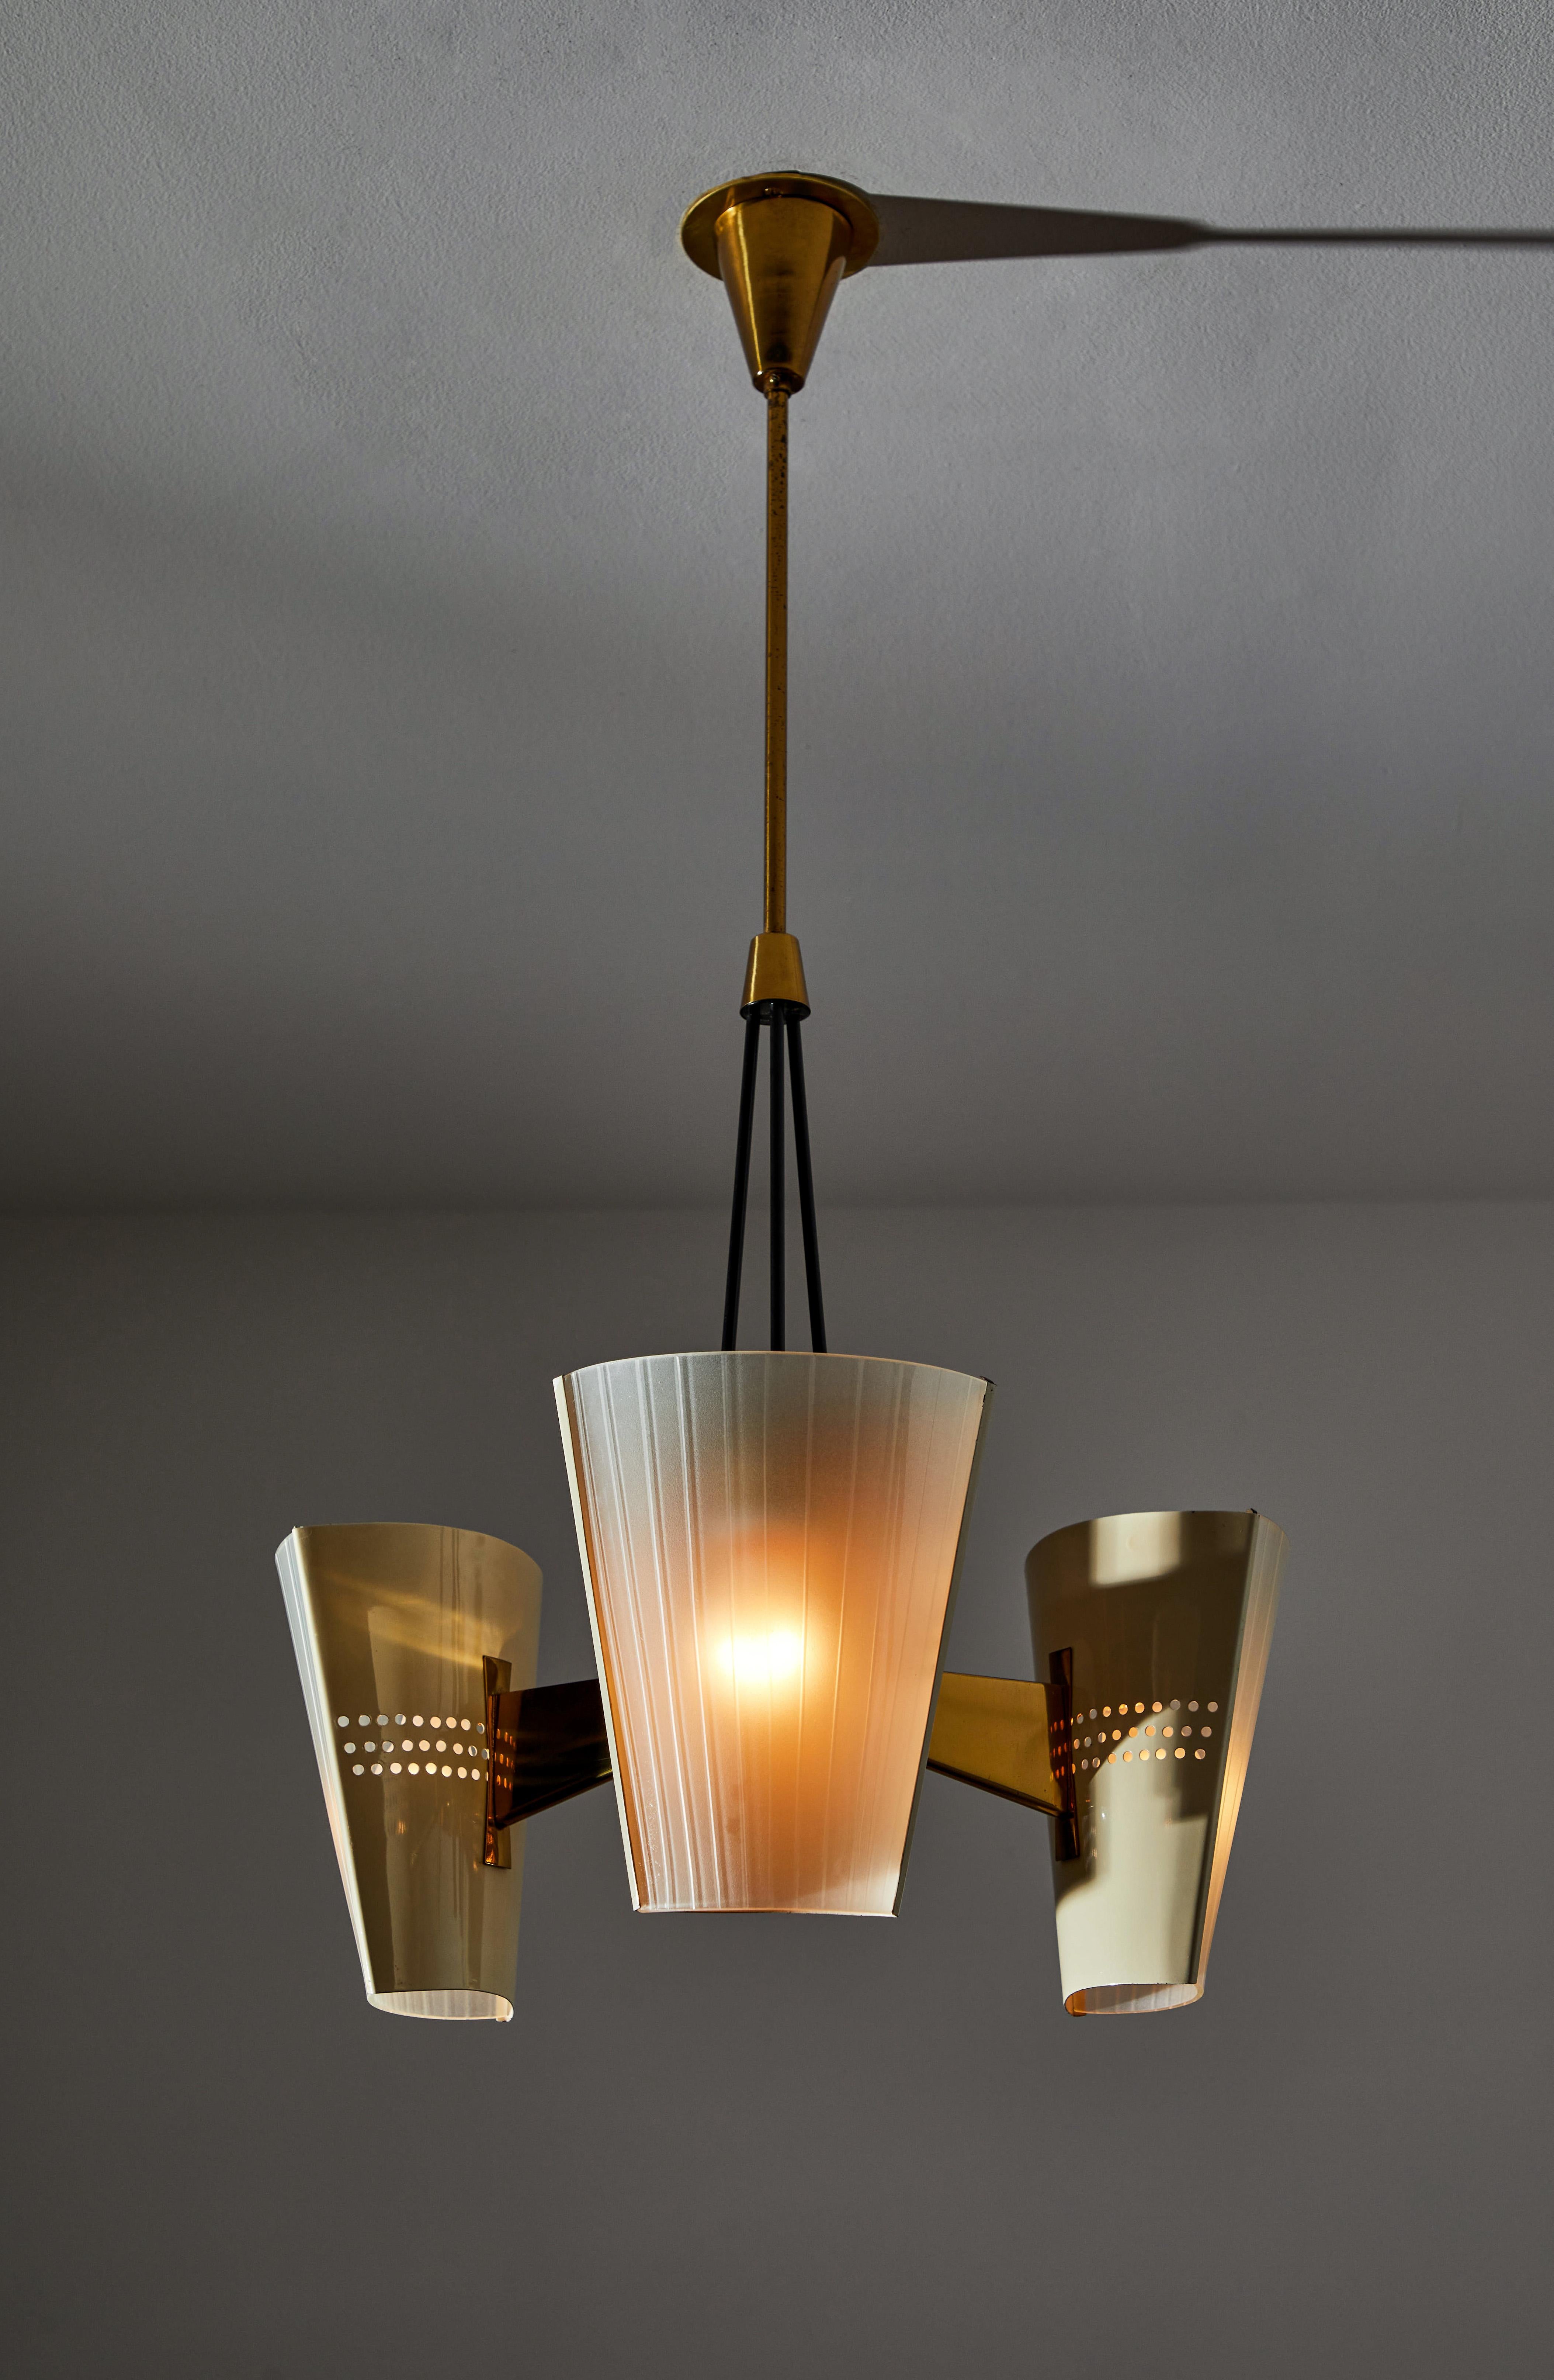 Suspension light by Stilnovo. Manufactured in Italy, circa 1950s. Enameled metal, etched glass. Rewired for U.S. standards. Custom brass ceiling plate. We recommend three E27 60w maximum bulbs. Bulbs included as a one time courtesy.
  